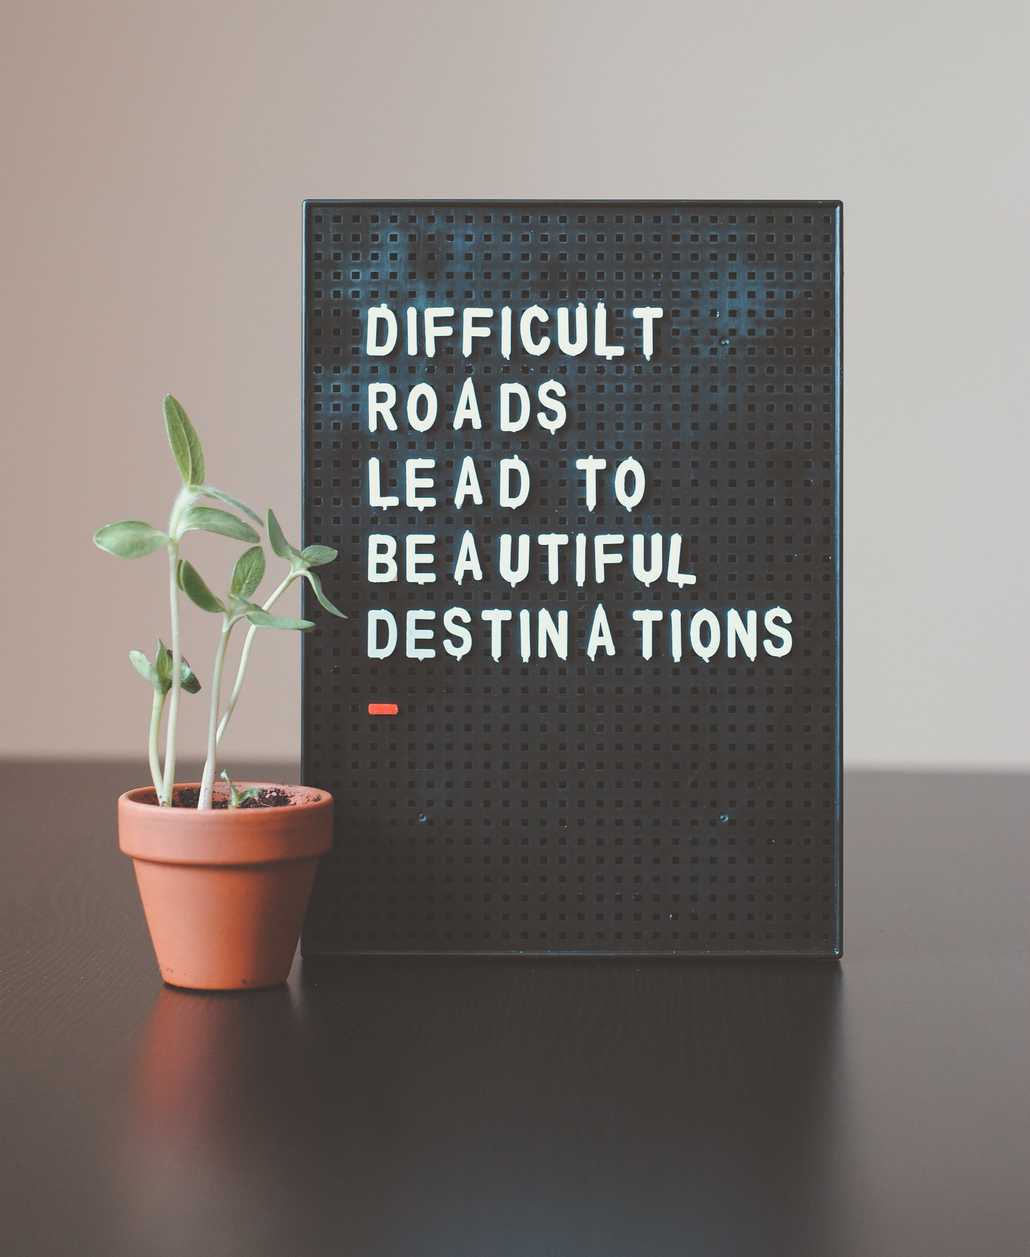 Message: Difficult roads lead to beautiful destinations